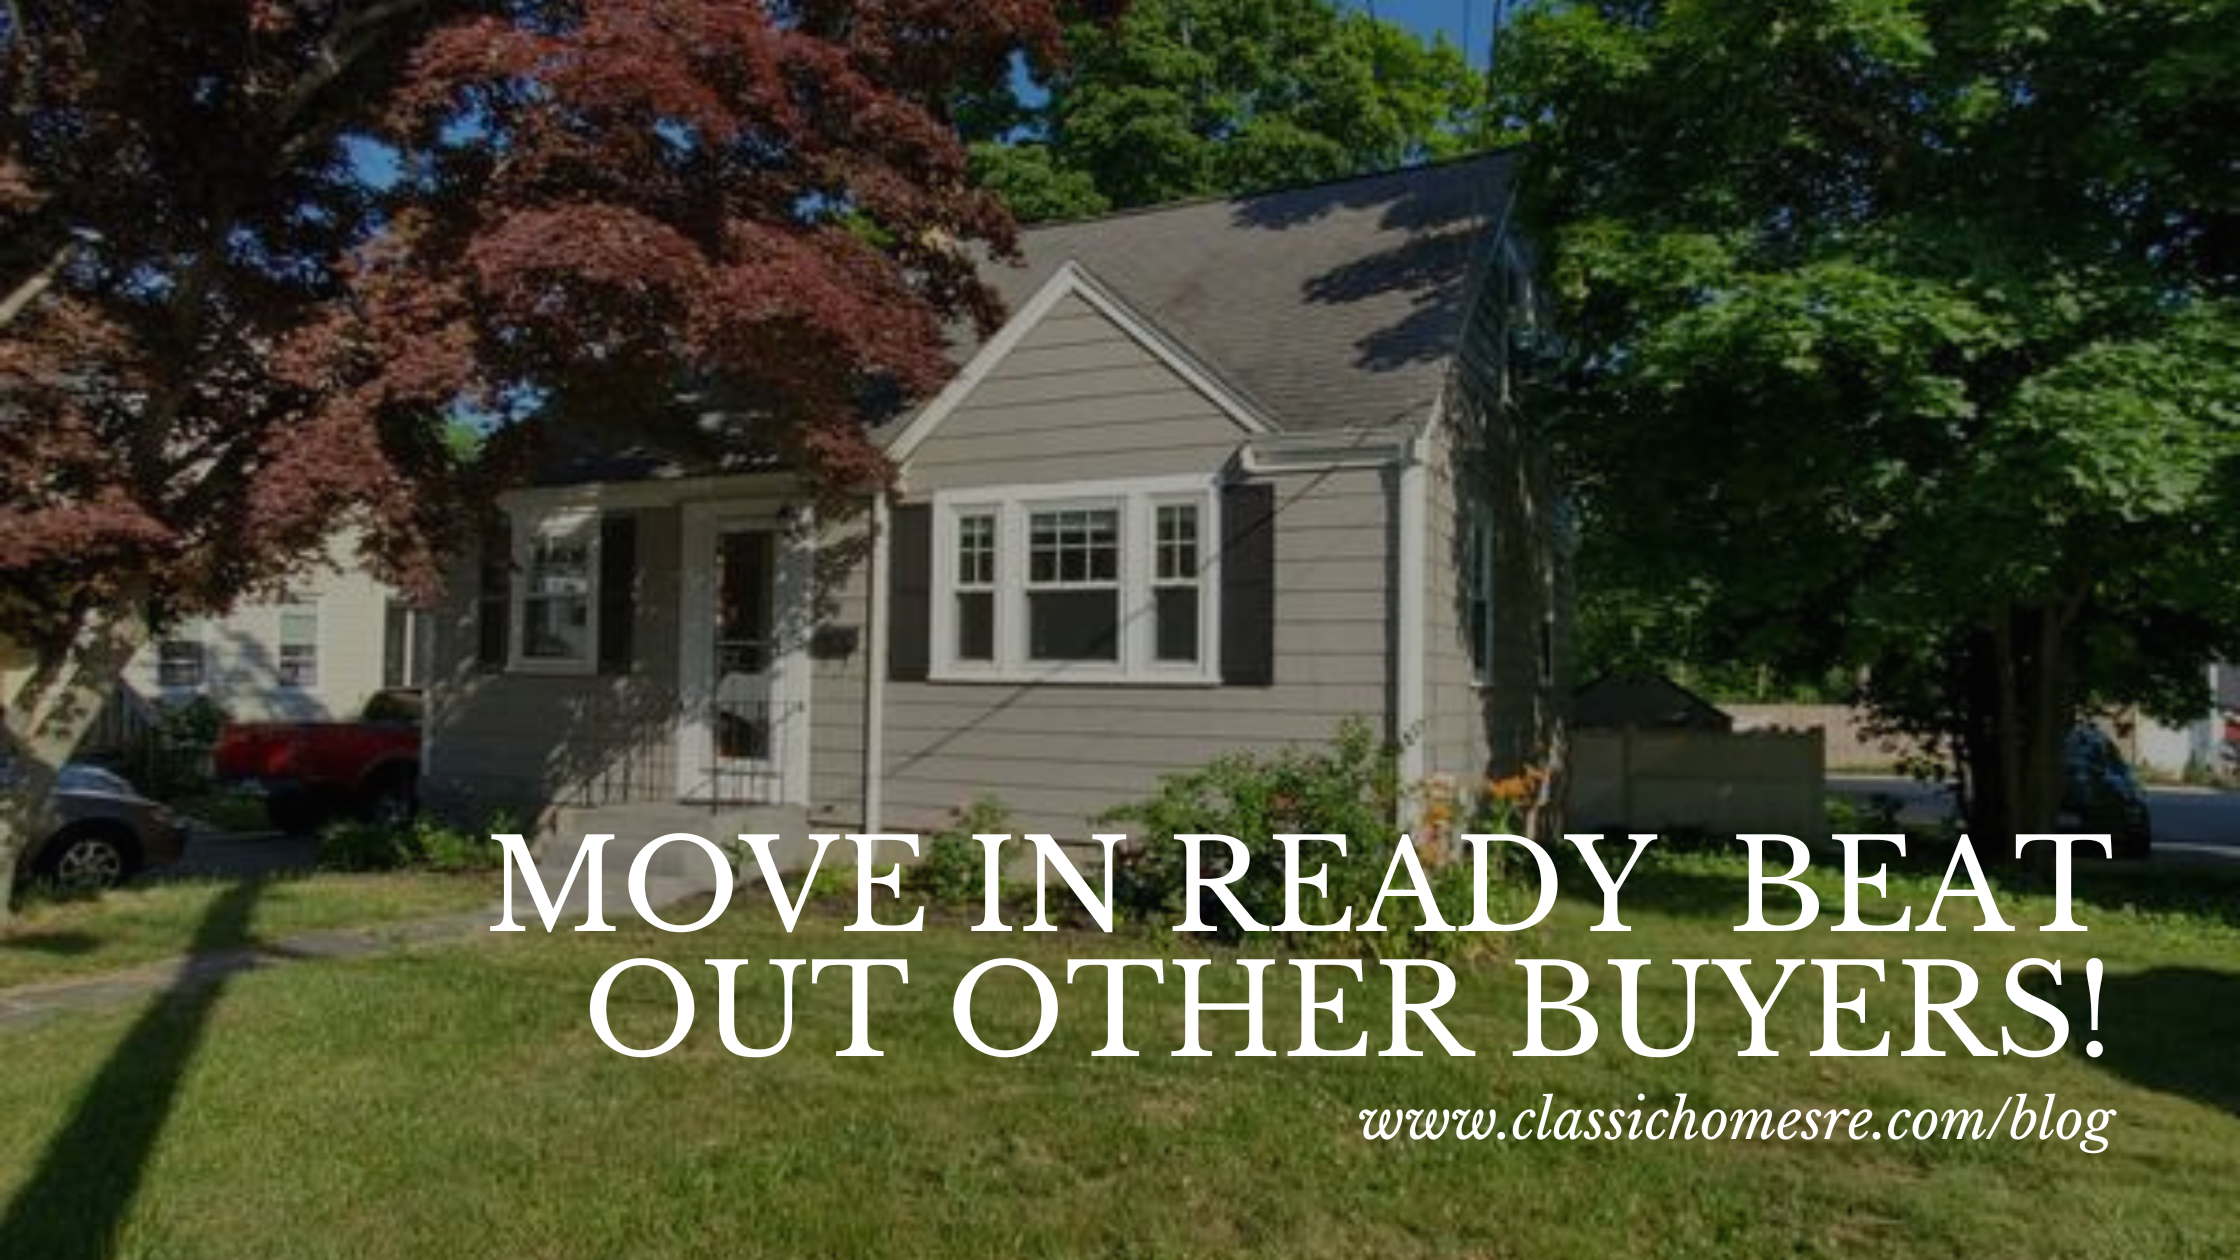 MOVE IN READY ~ BEAT OUT OTHER BUYERS!